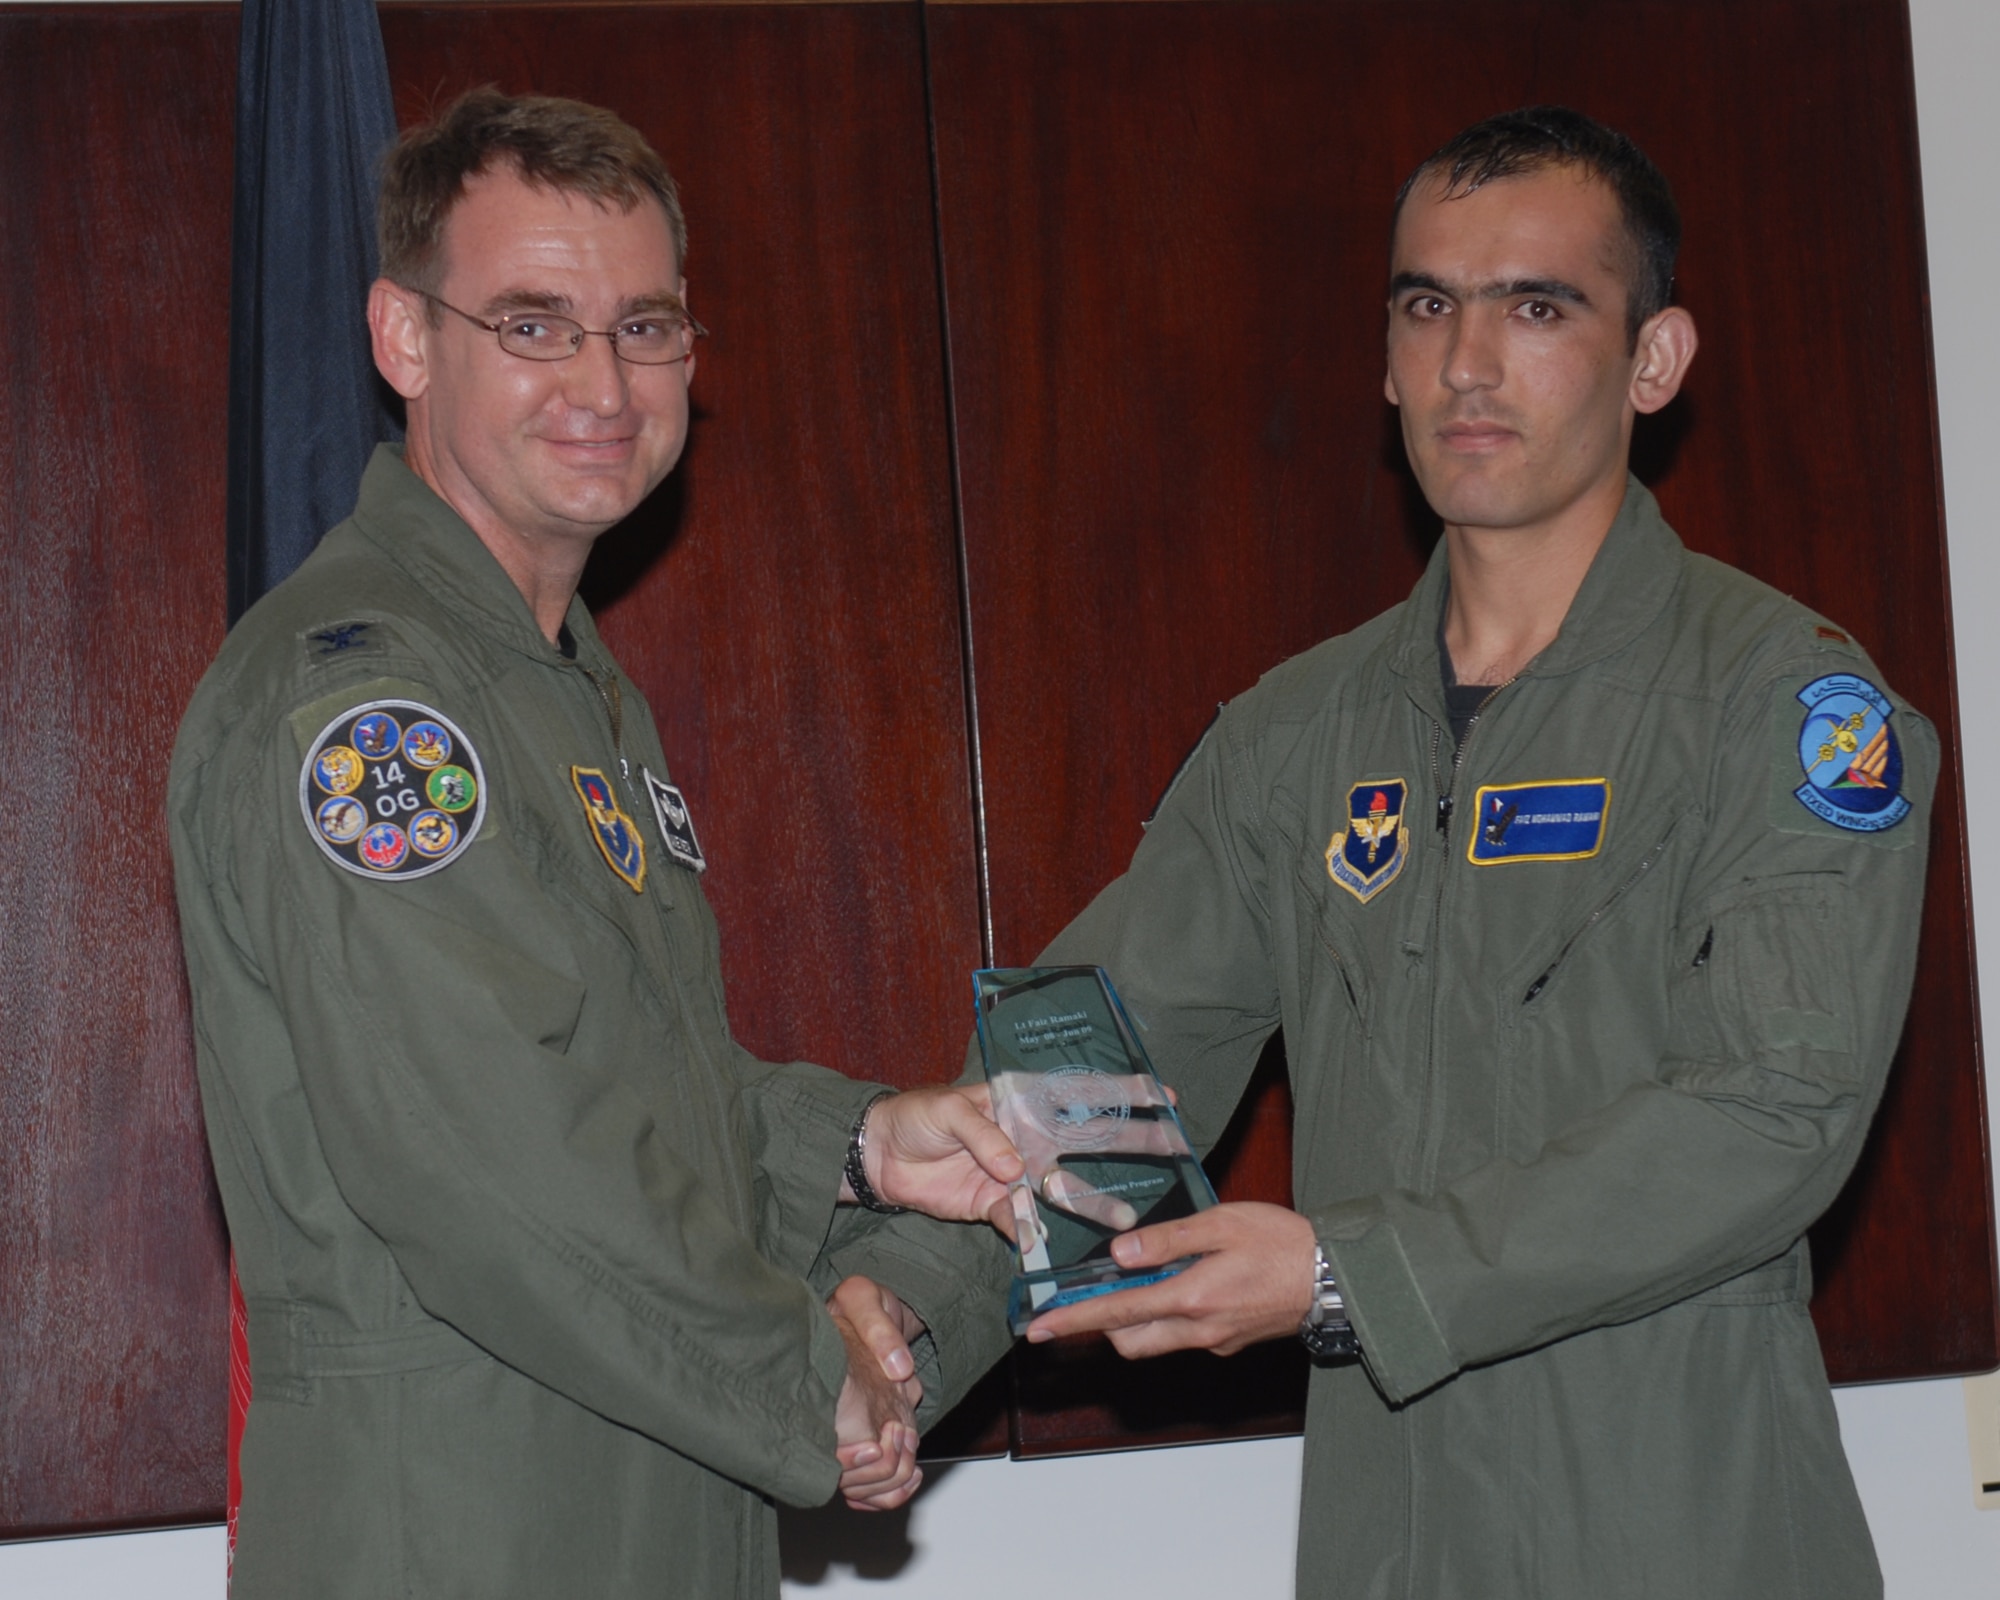 Afghan National Army Air Corps Lt. Faiz Ramaki received this Aviation Leadership award from 14th Operations Group commander Col. David Reth in a special graduation ceremony June 12.  The Aviation Leadership Program is a Secretary of the Air Force initiative to build foreign relations with other air forces. (US Air Force Photo/Melissa Duncan)